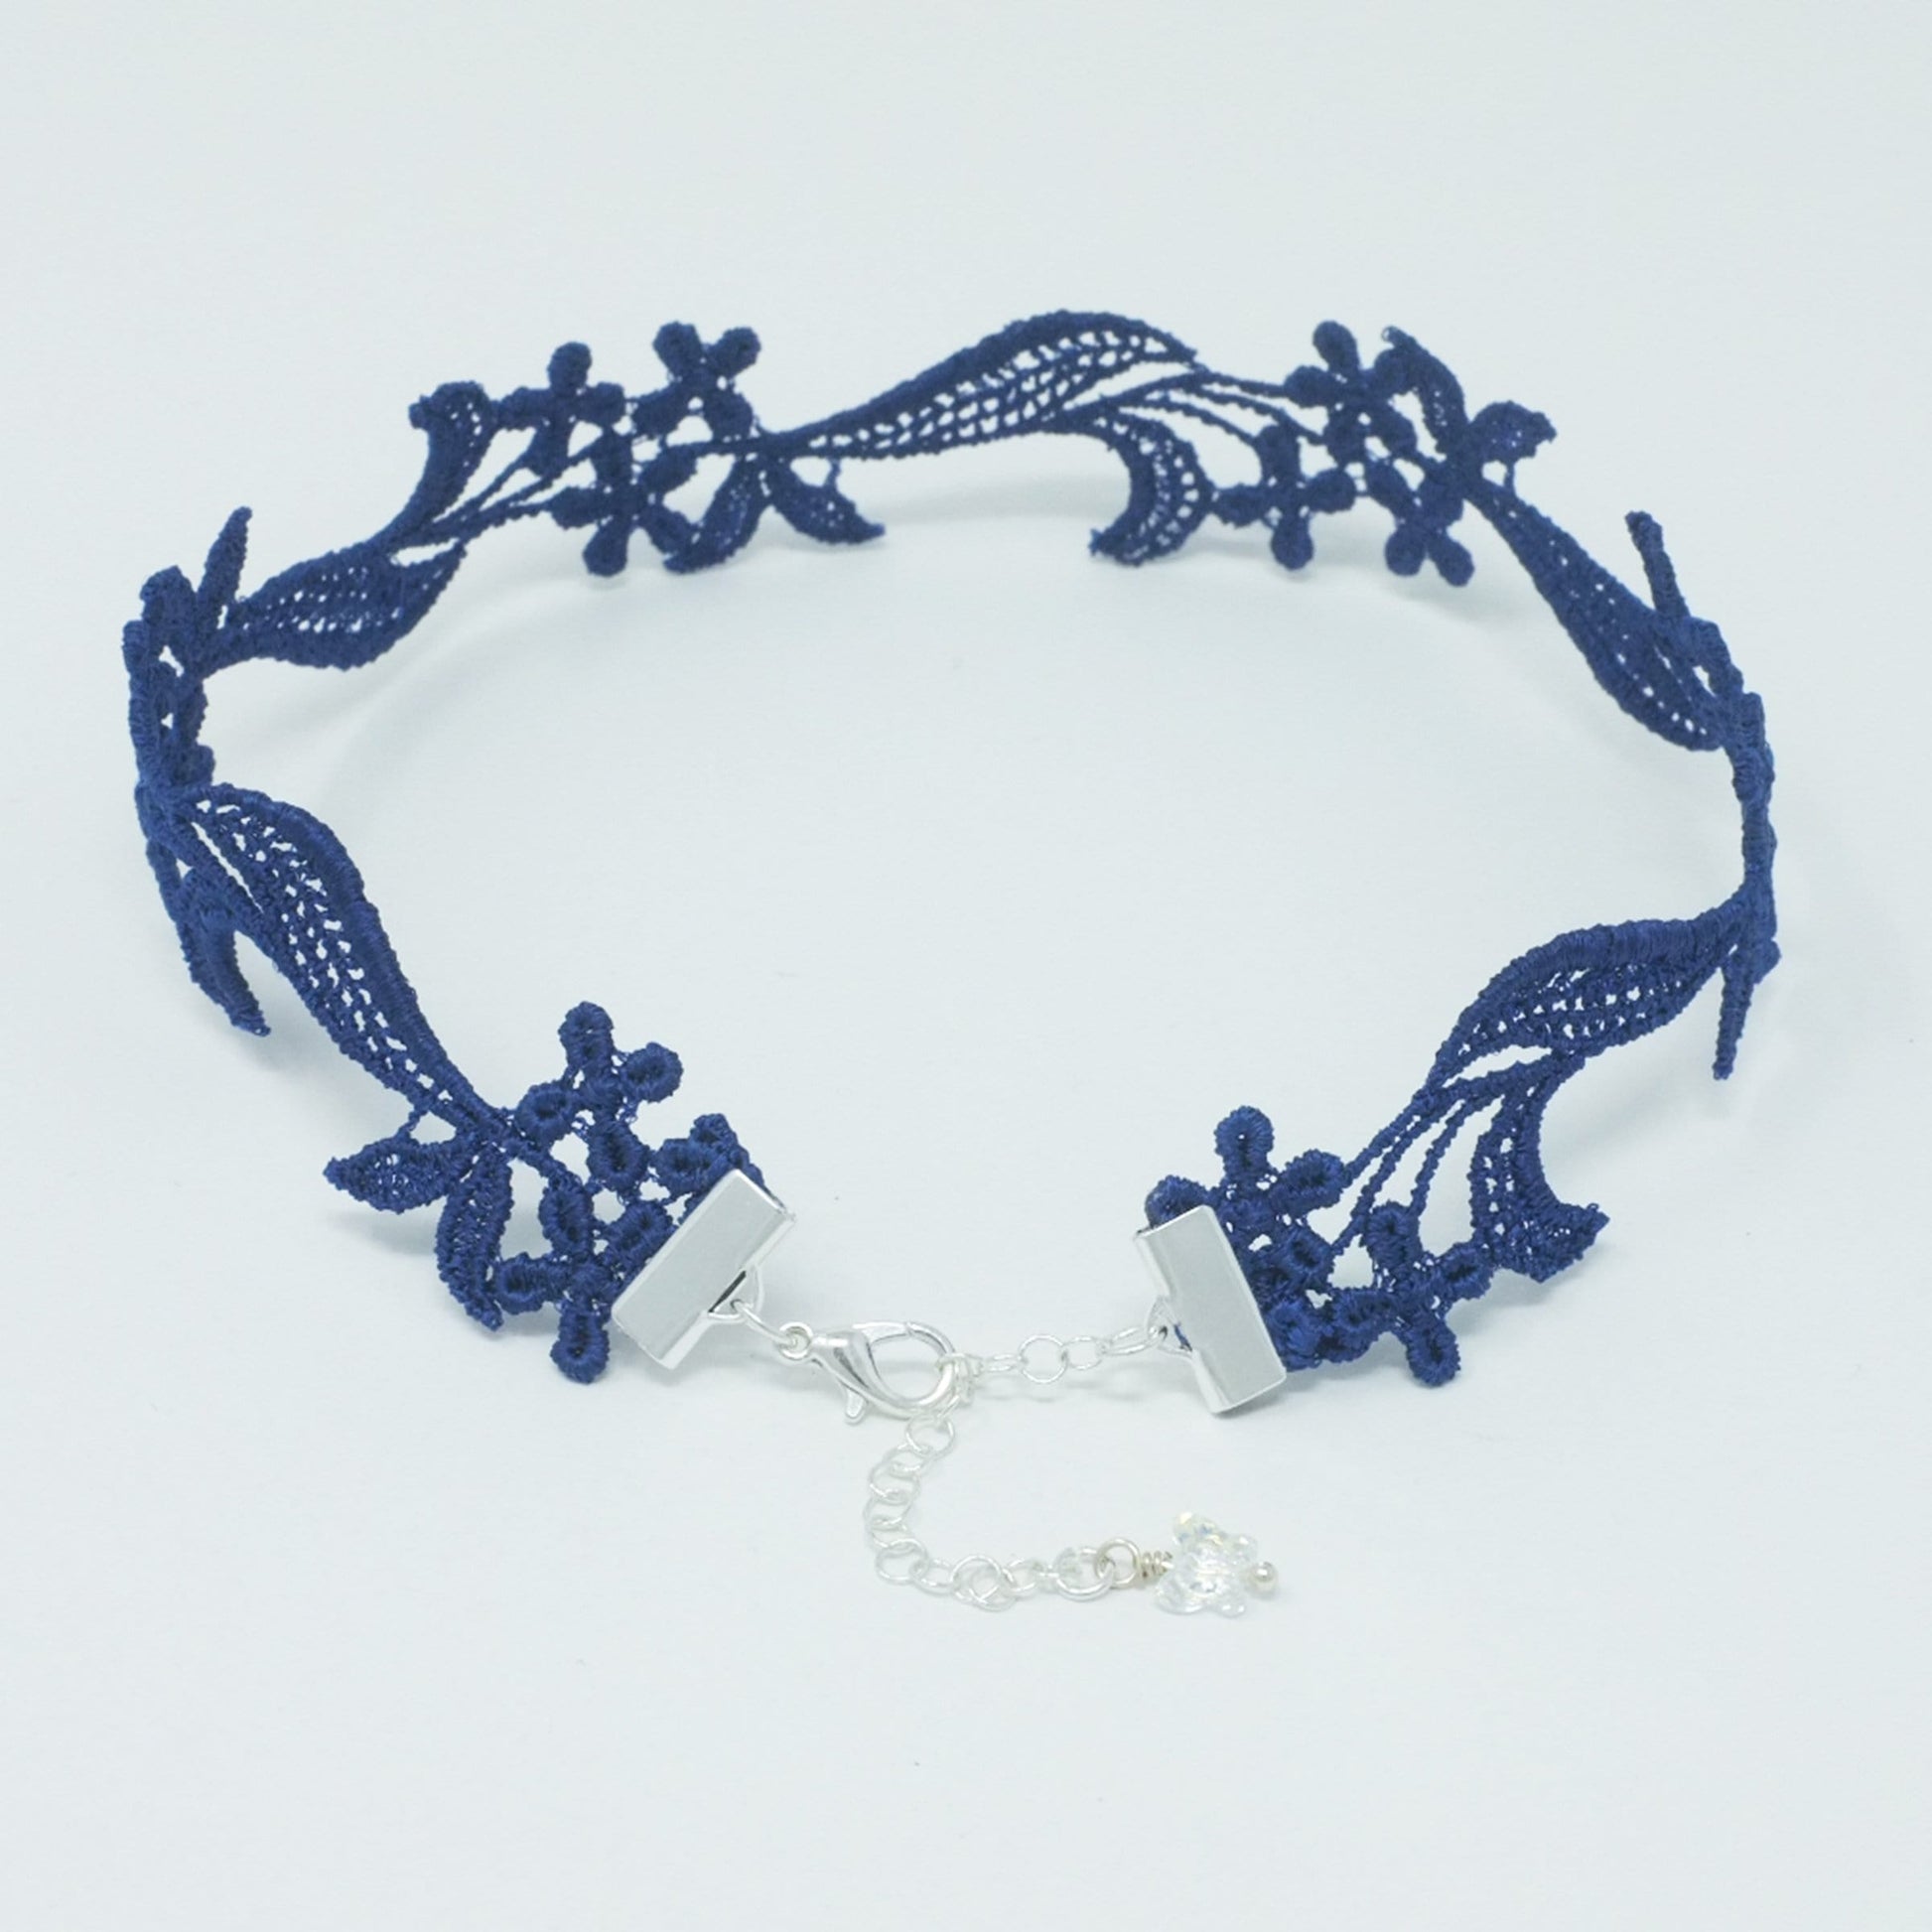 Feminine Lace Navy Blue Floral Lace Necklace with Floral pattern and silver clasp